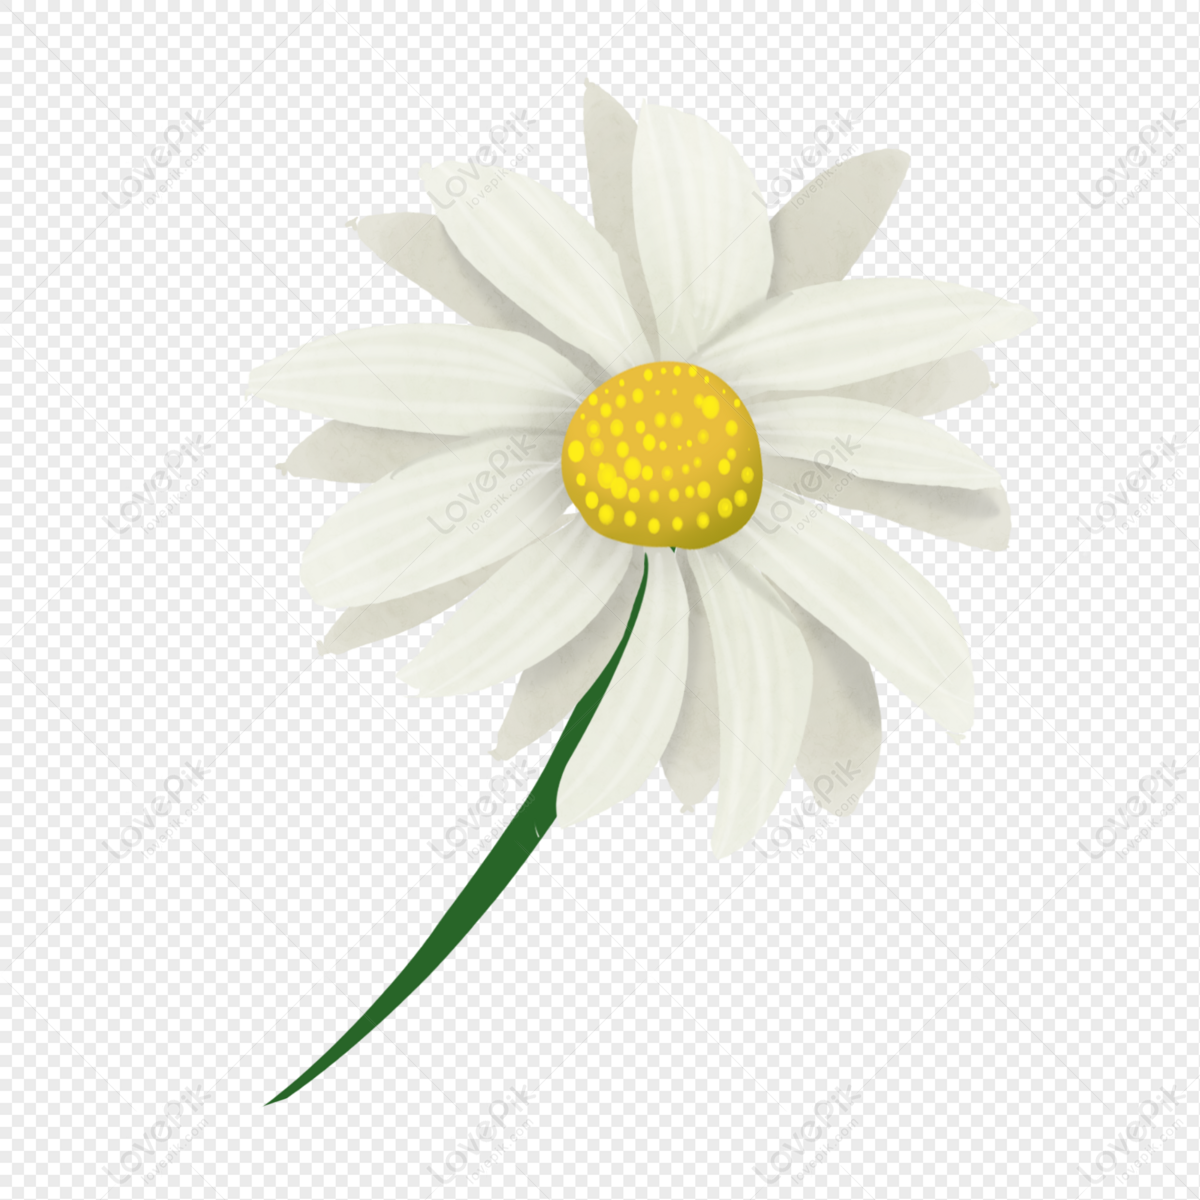 Cartoon White Daisy PNG Image And Clipart Image For Free Download - Lovepik  | 401568398